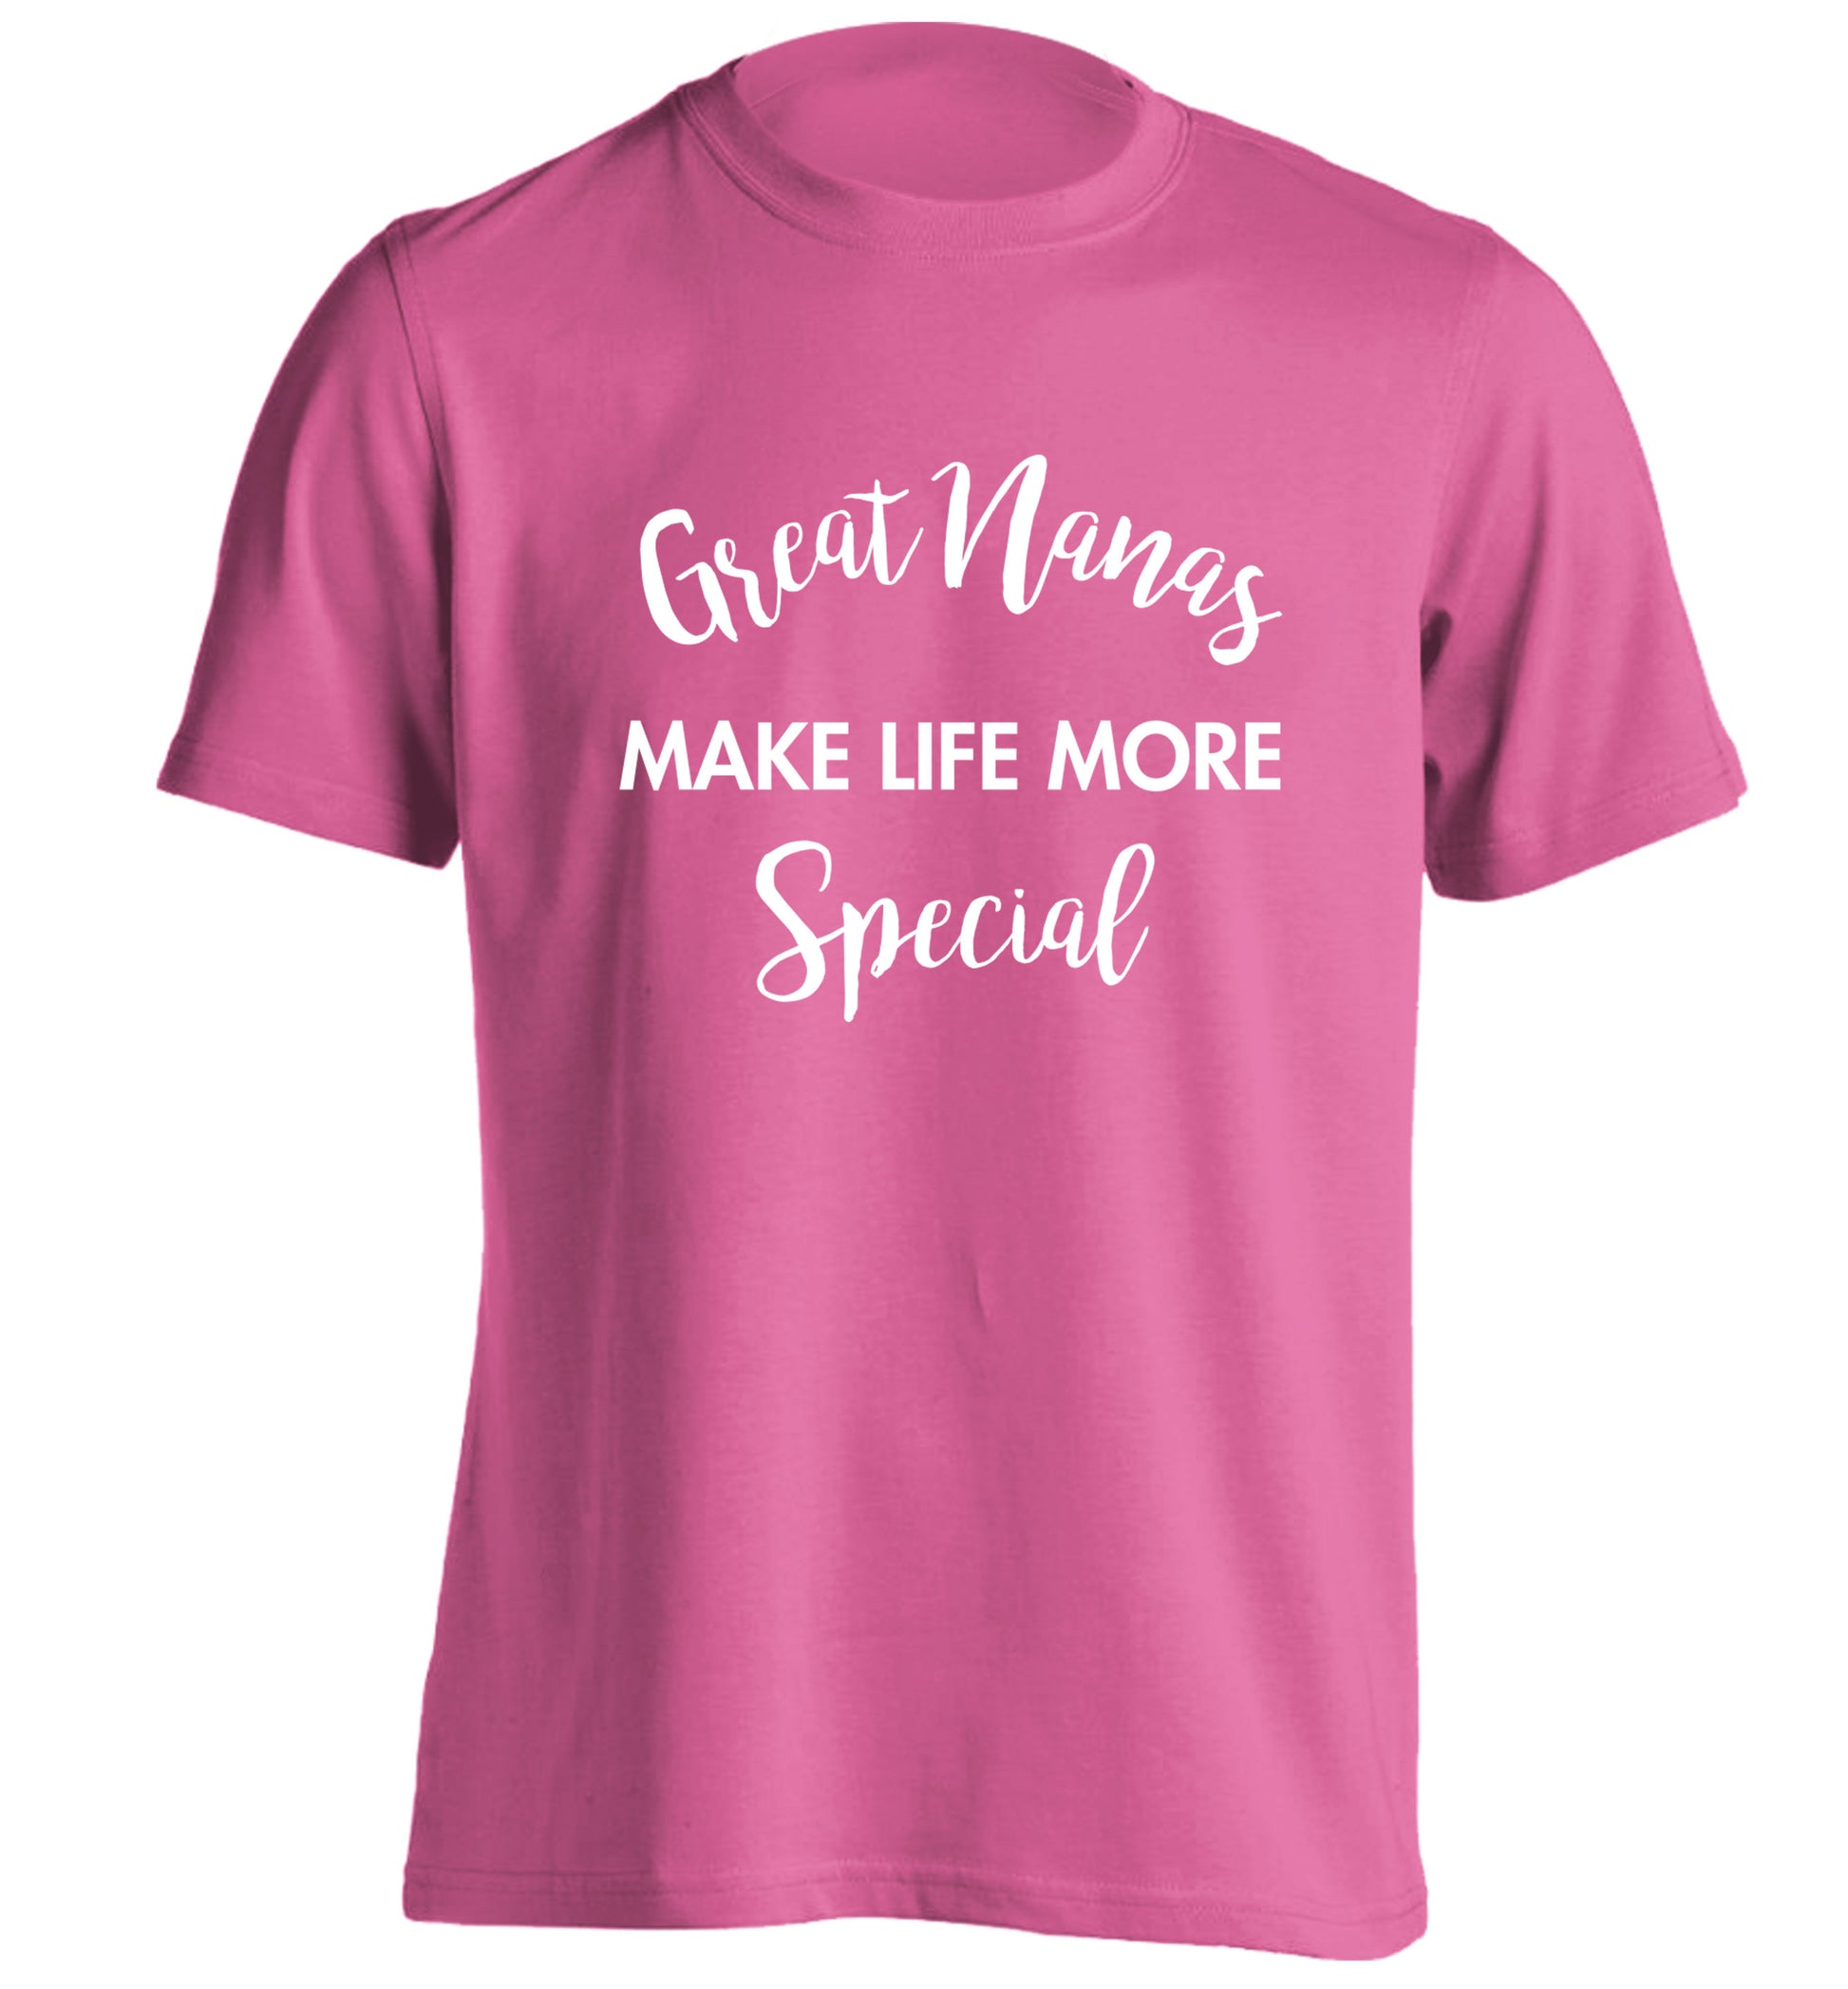 Great nanas make life more special adults unisex pink Tshirt 2XL